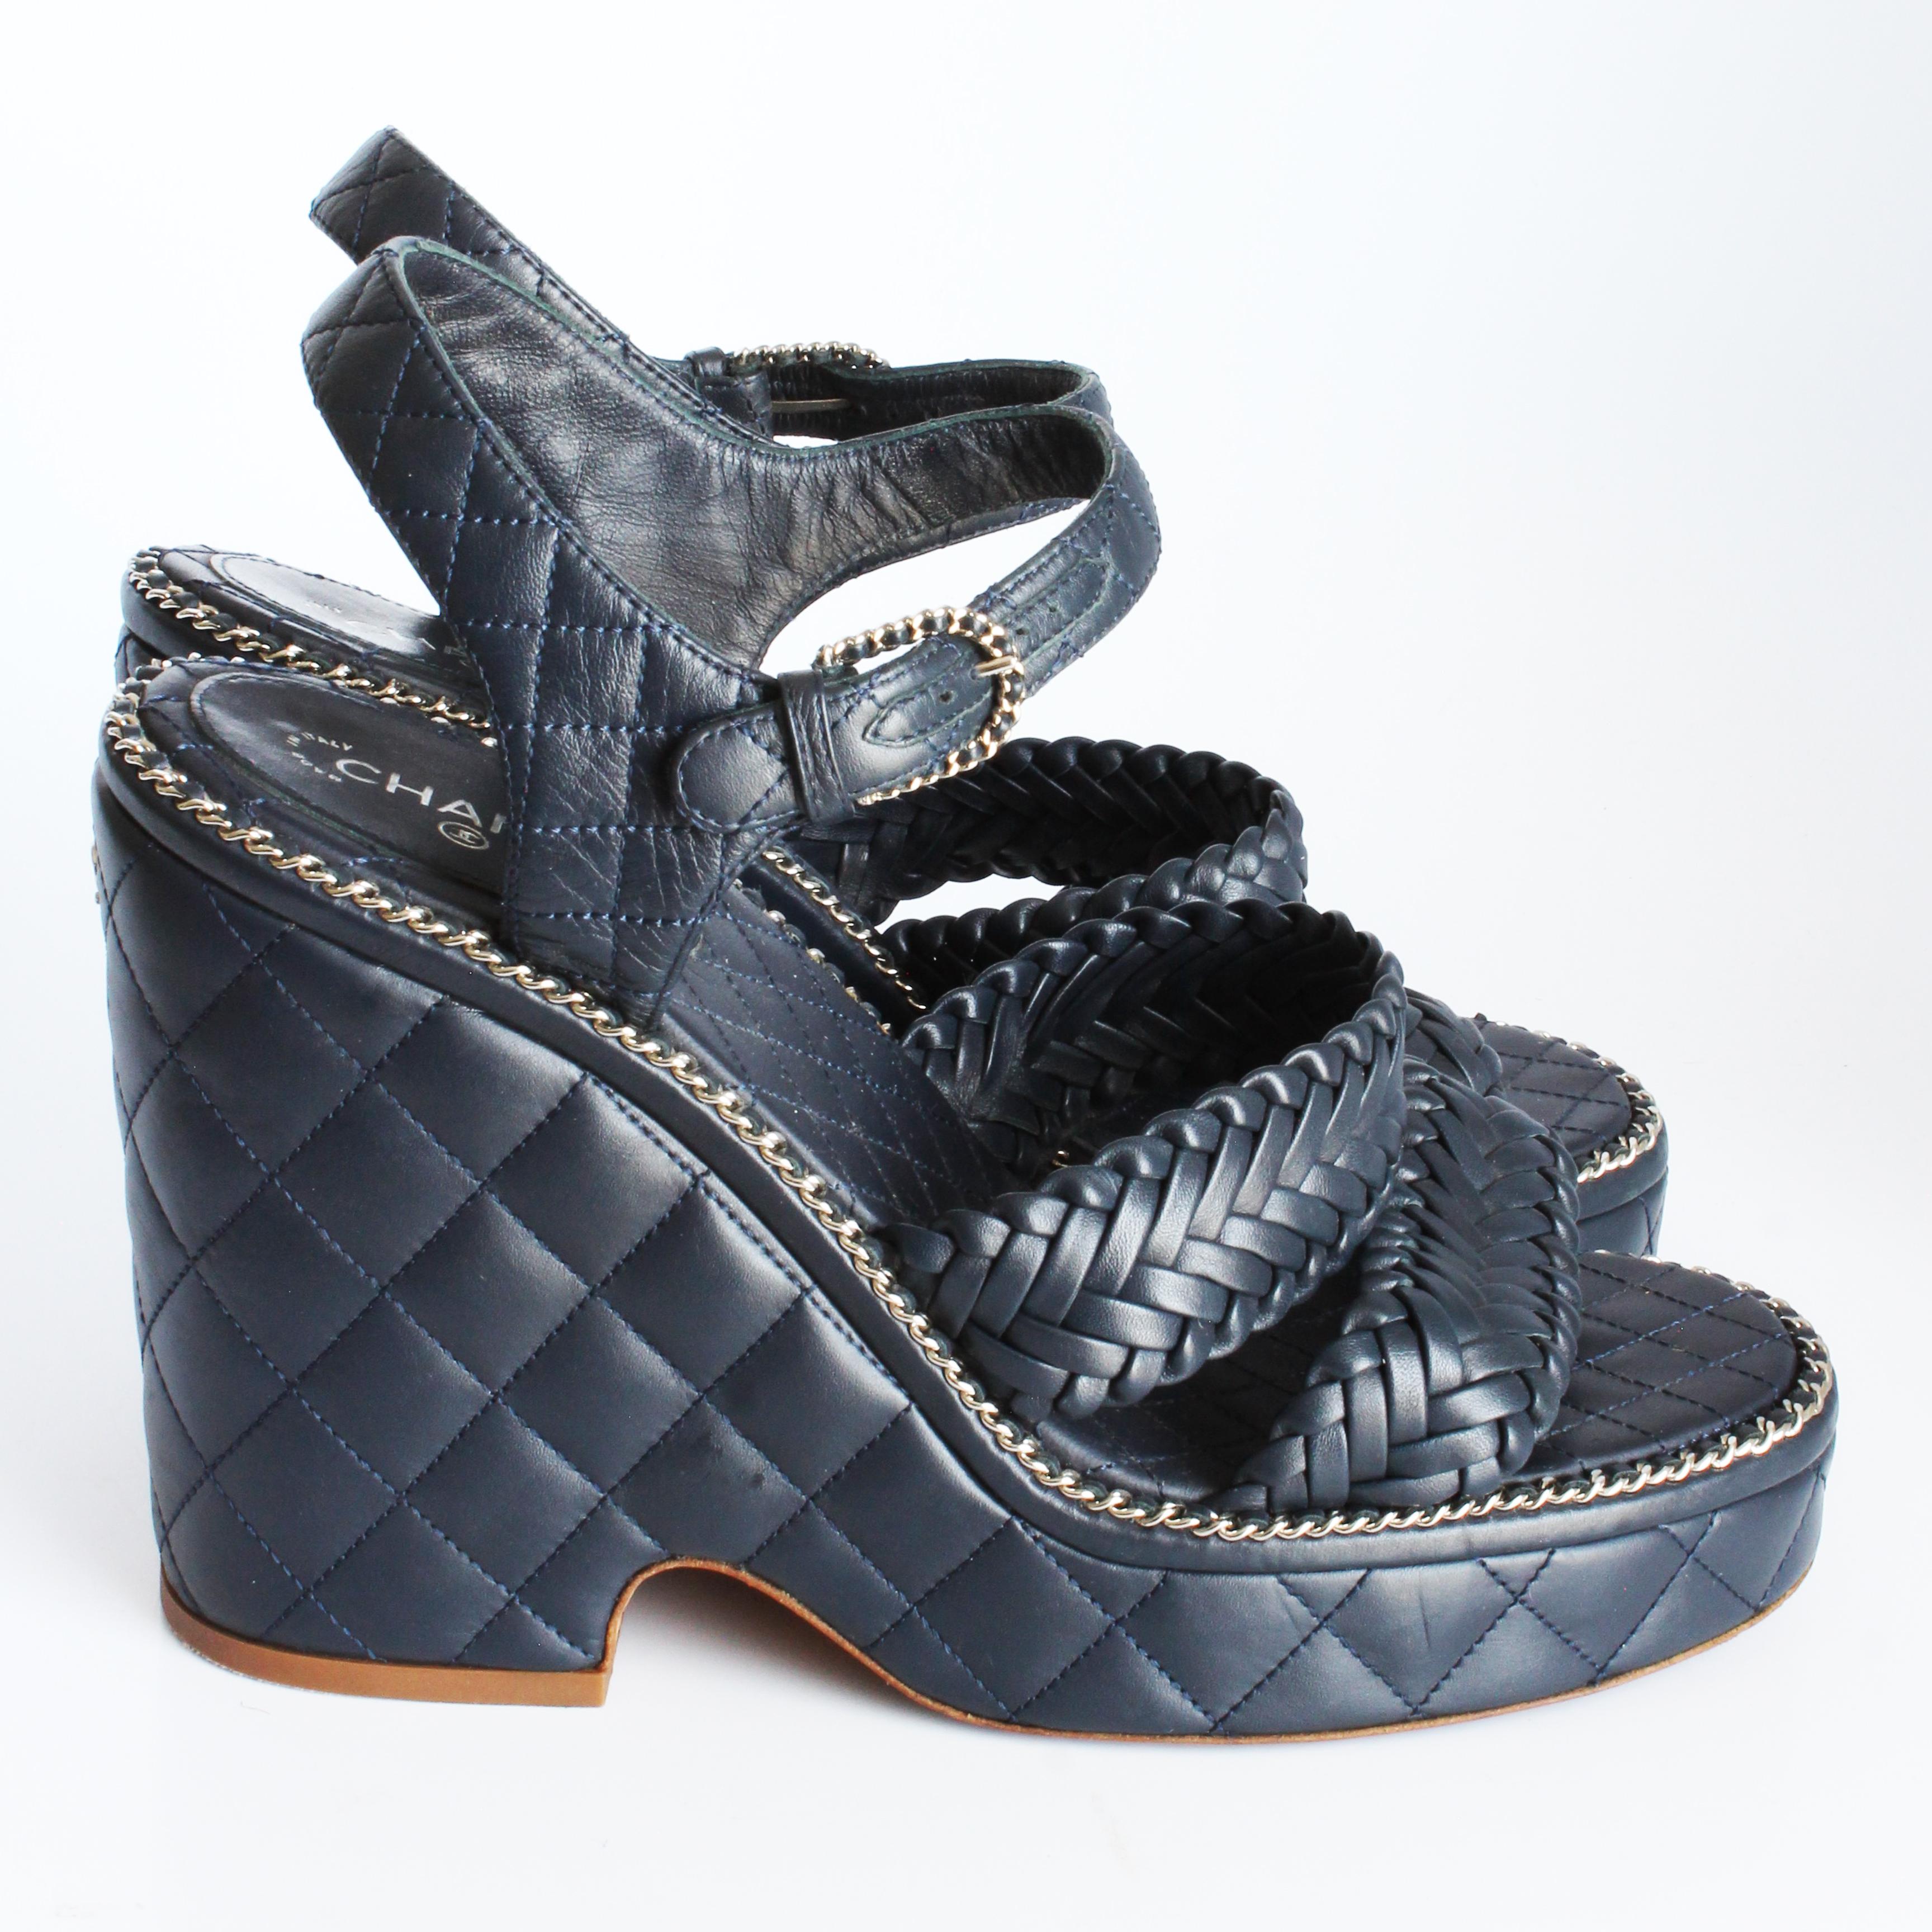 Authentic, preowned Chanel quilted calfskin chain around sandals with platform heels, from the 2015 collection.  Made from Chanel's signature matelasse or quilted calfskin in navy, these chic sandals feature braided straps and tiny silver chain and